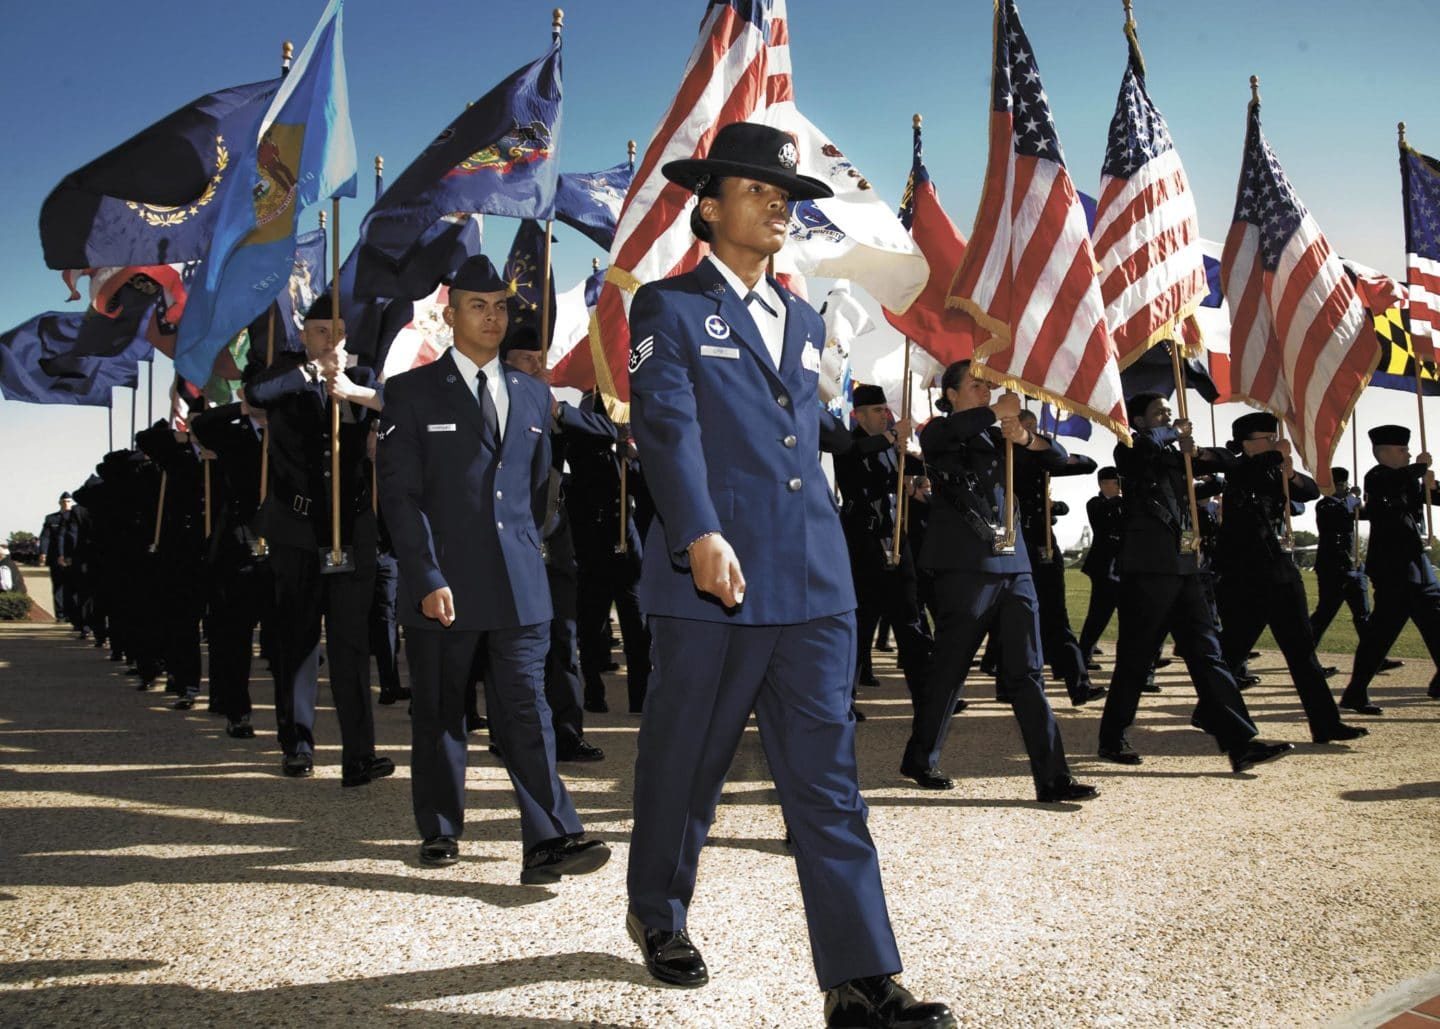 air force basic marching formation